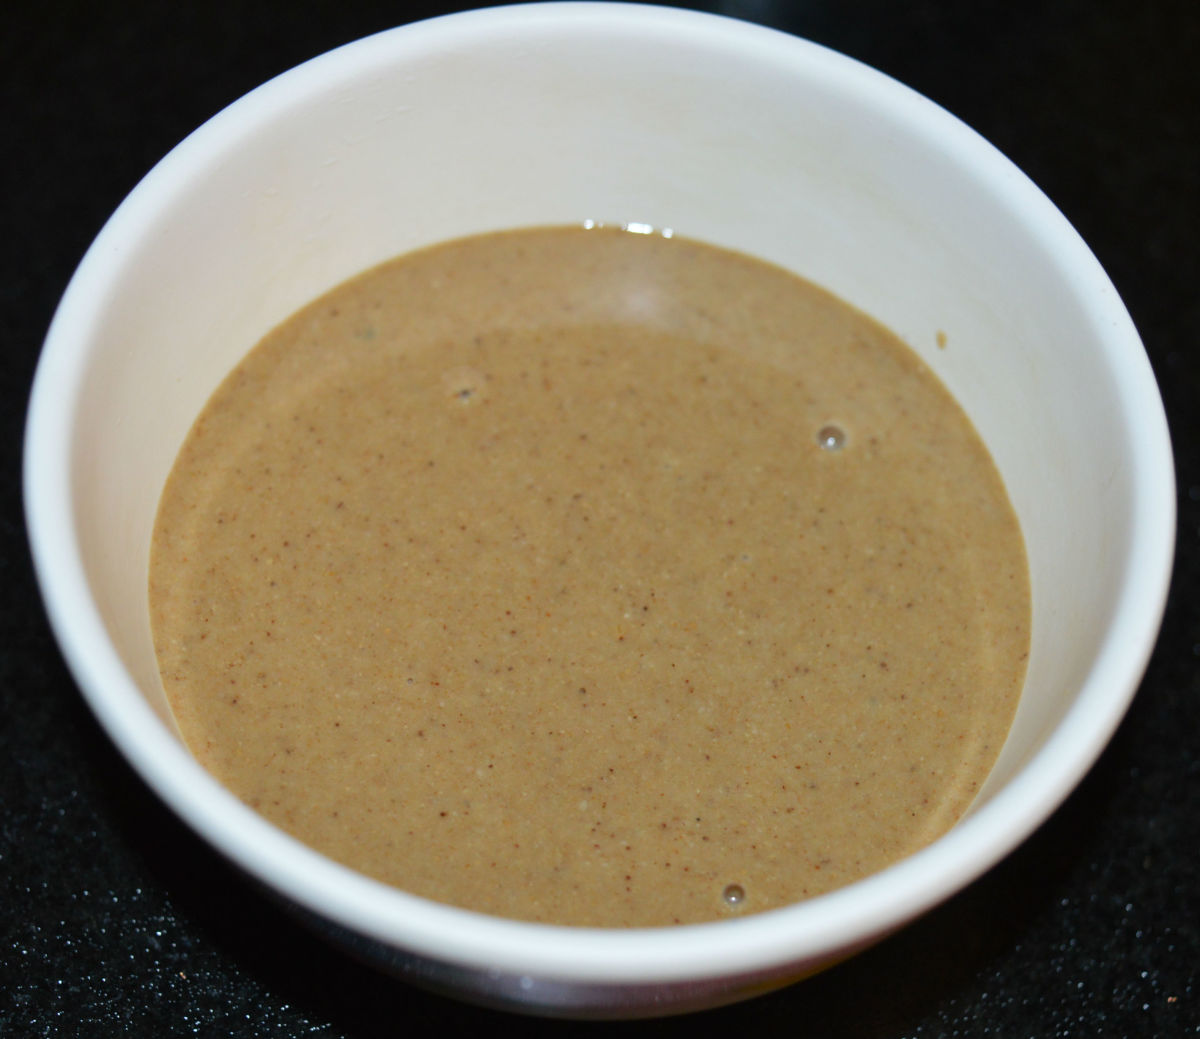 Tahini(sesame seed paste). Use it as and when required. Store it in a refrigerator in an air-tight jar. You can use it for many months.